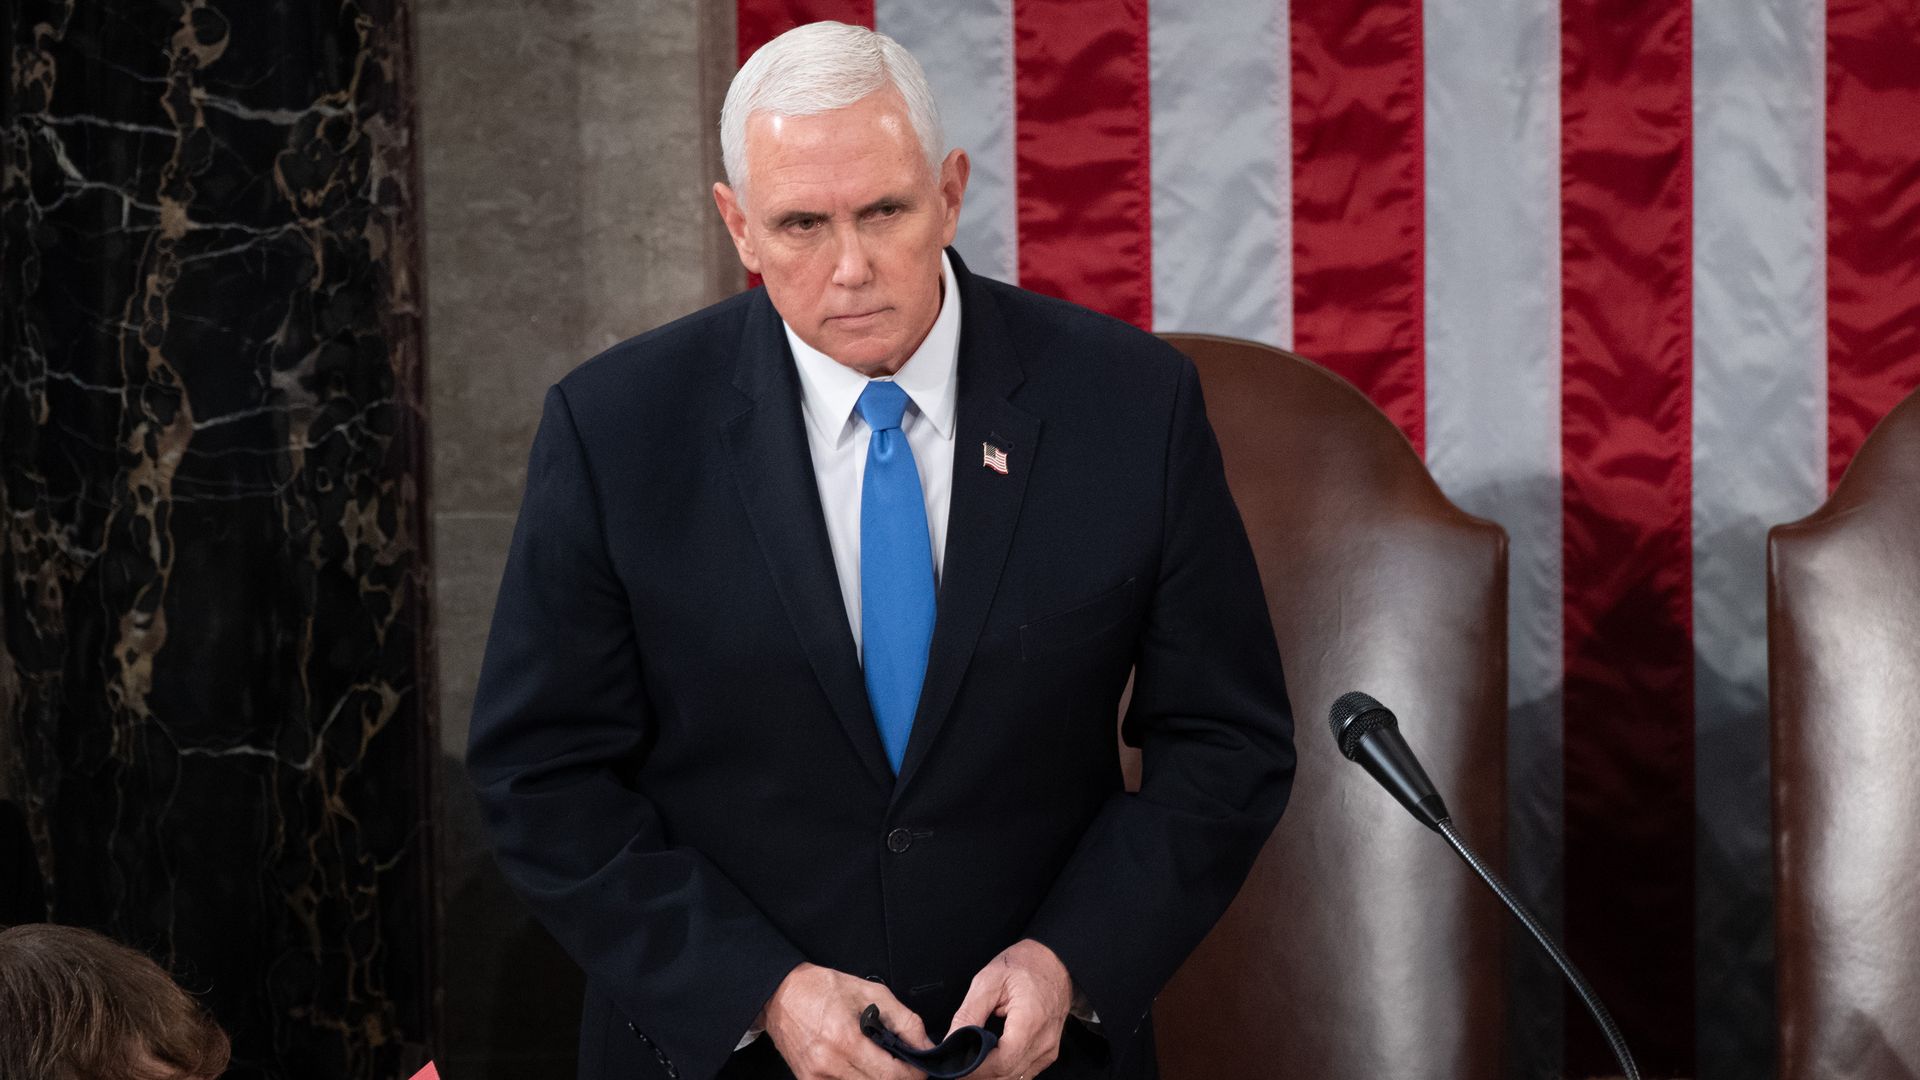 Vice President Pence presiding over a joint session of Congress on Jan. 6.